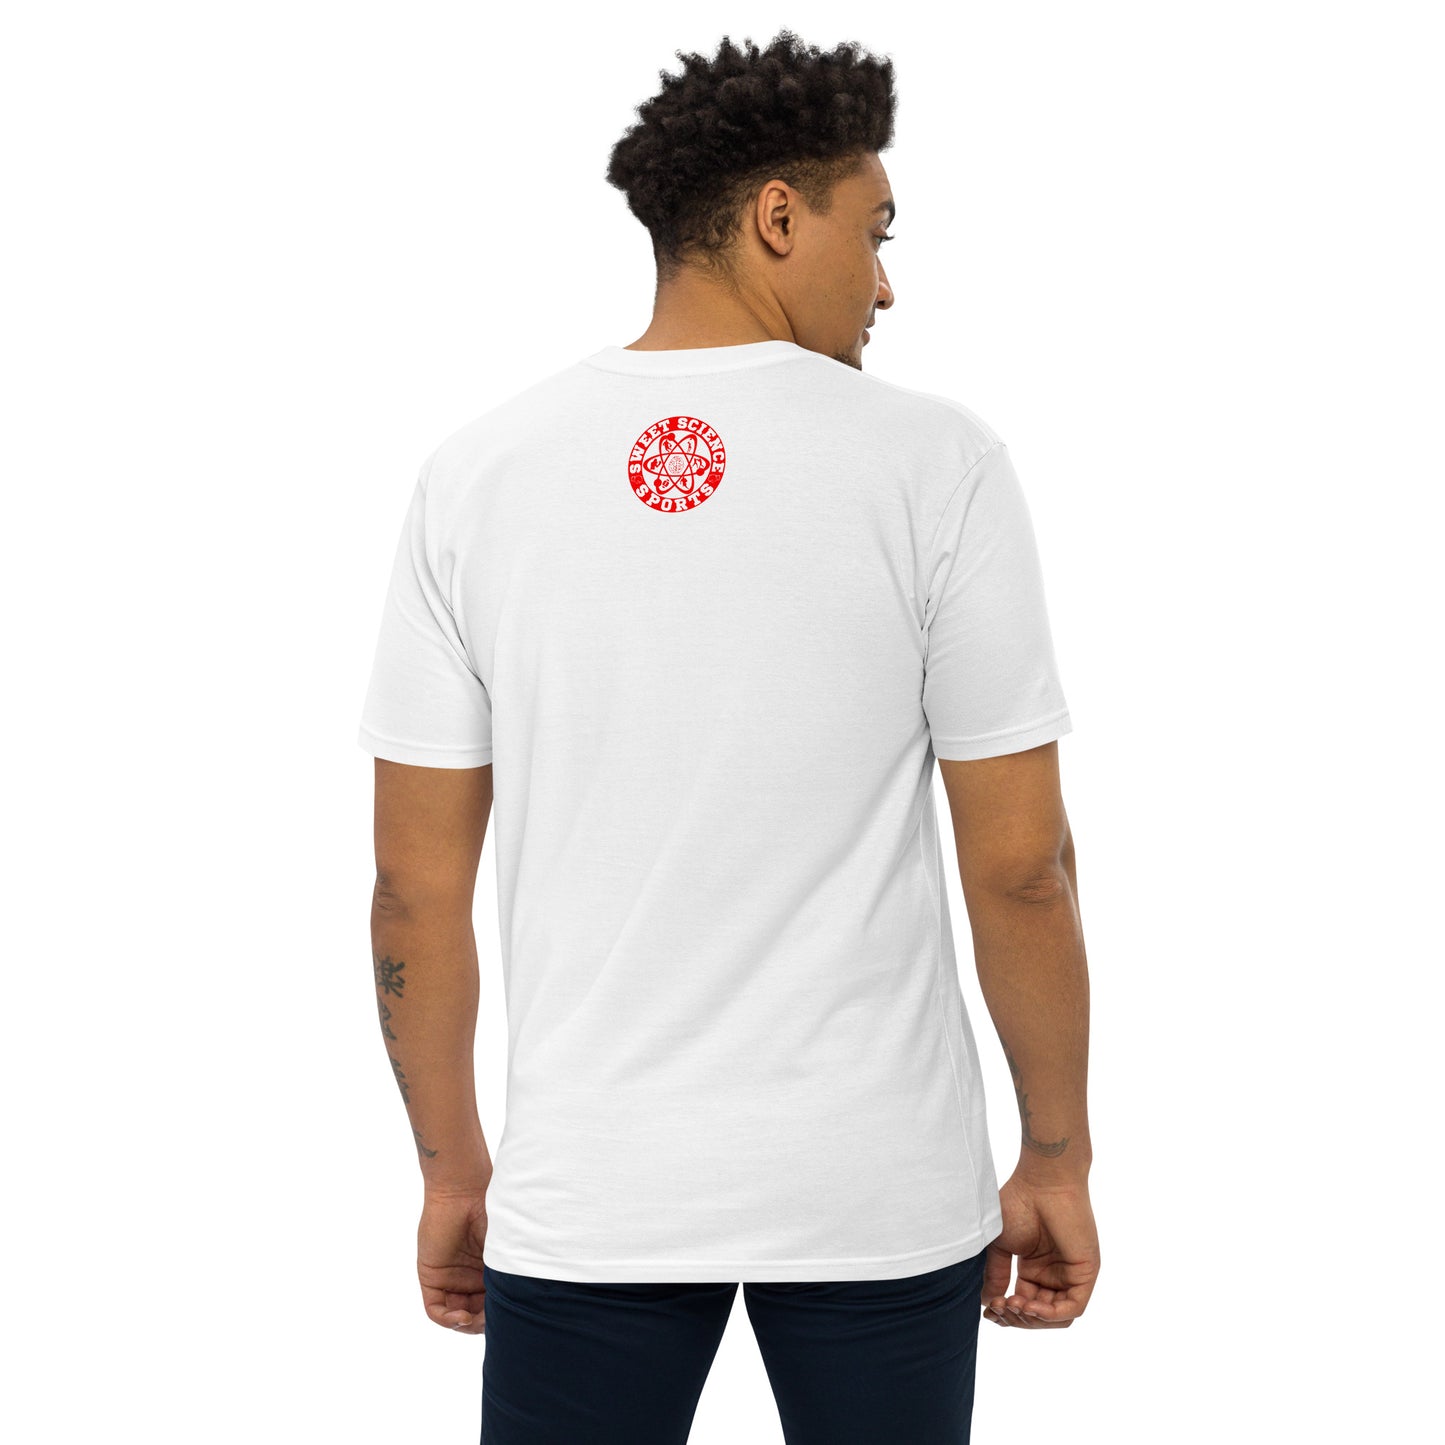 Sweet Science Sports The Boxer  heavyweight tee